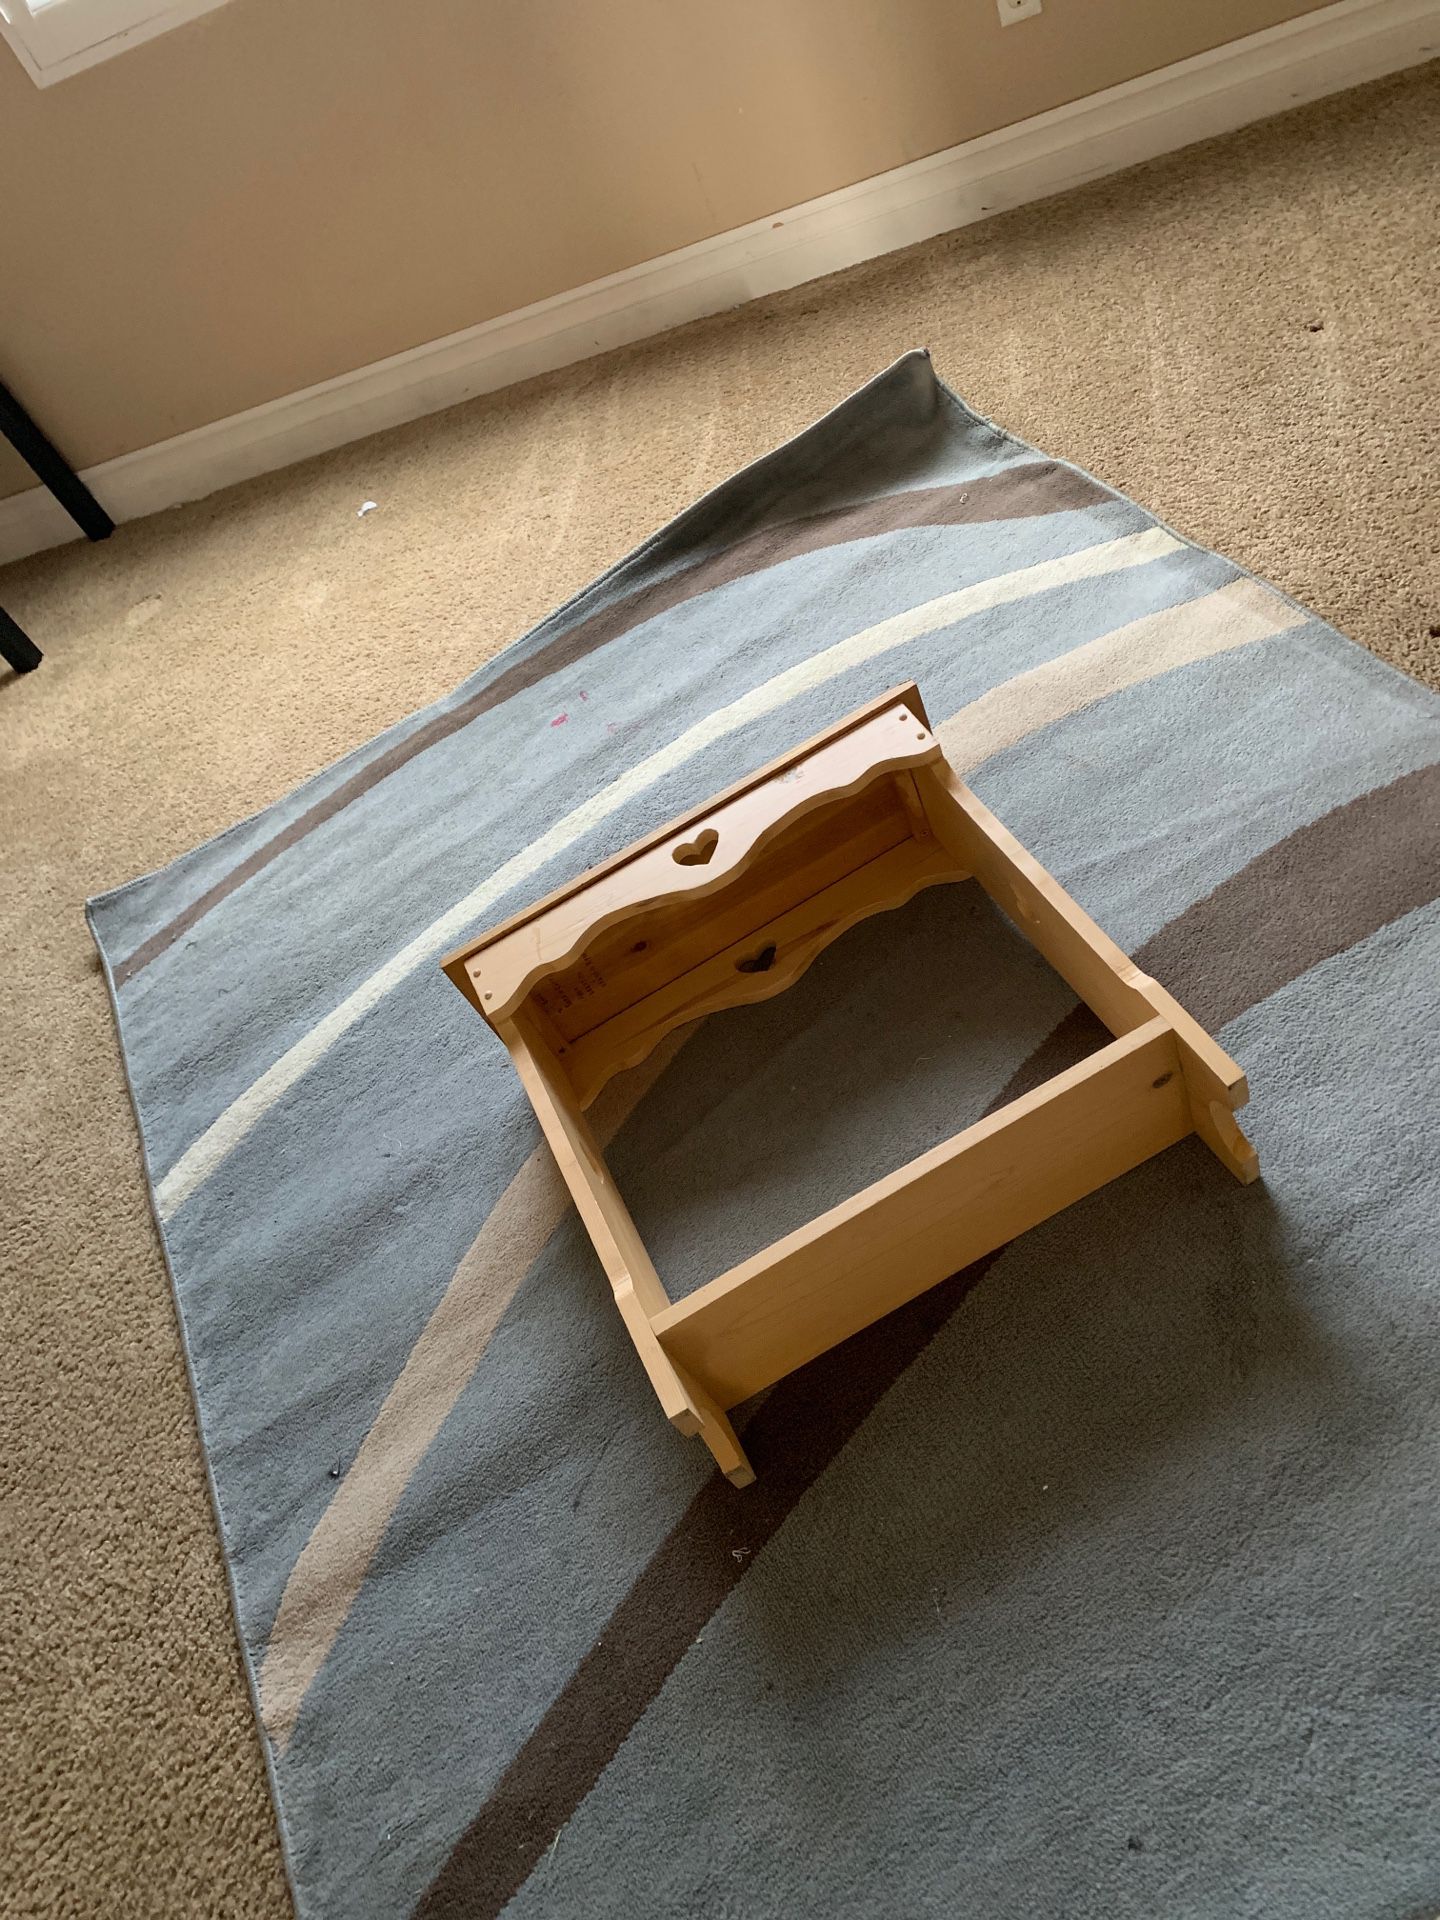 Free carpet and table